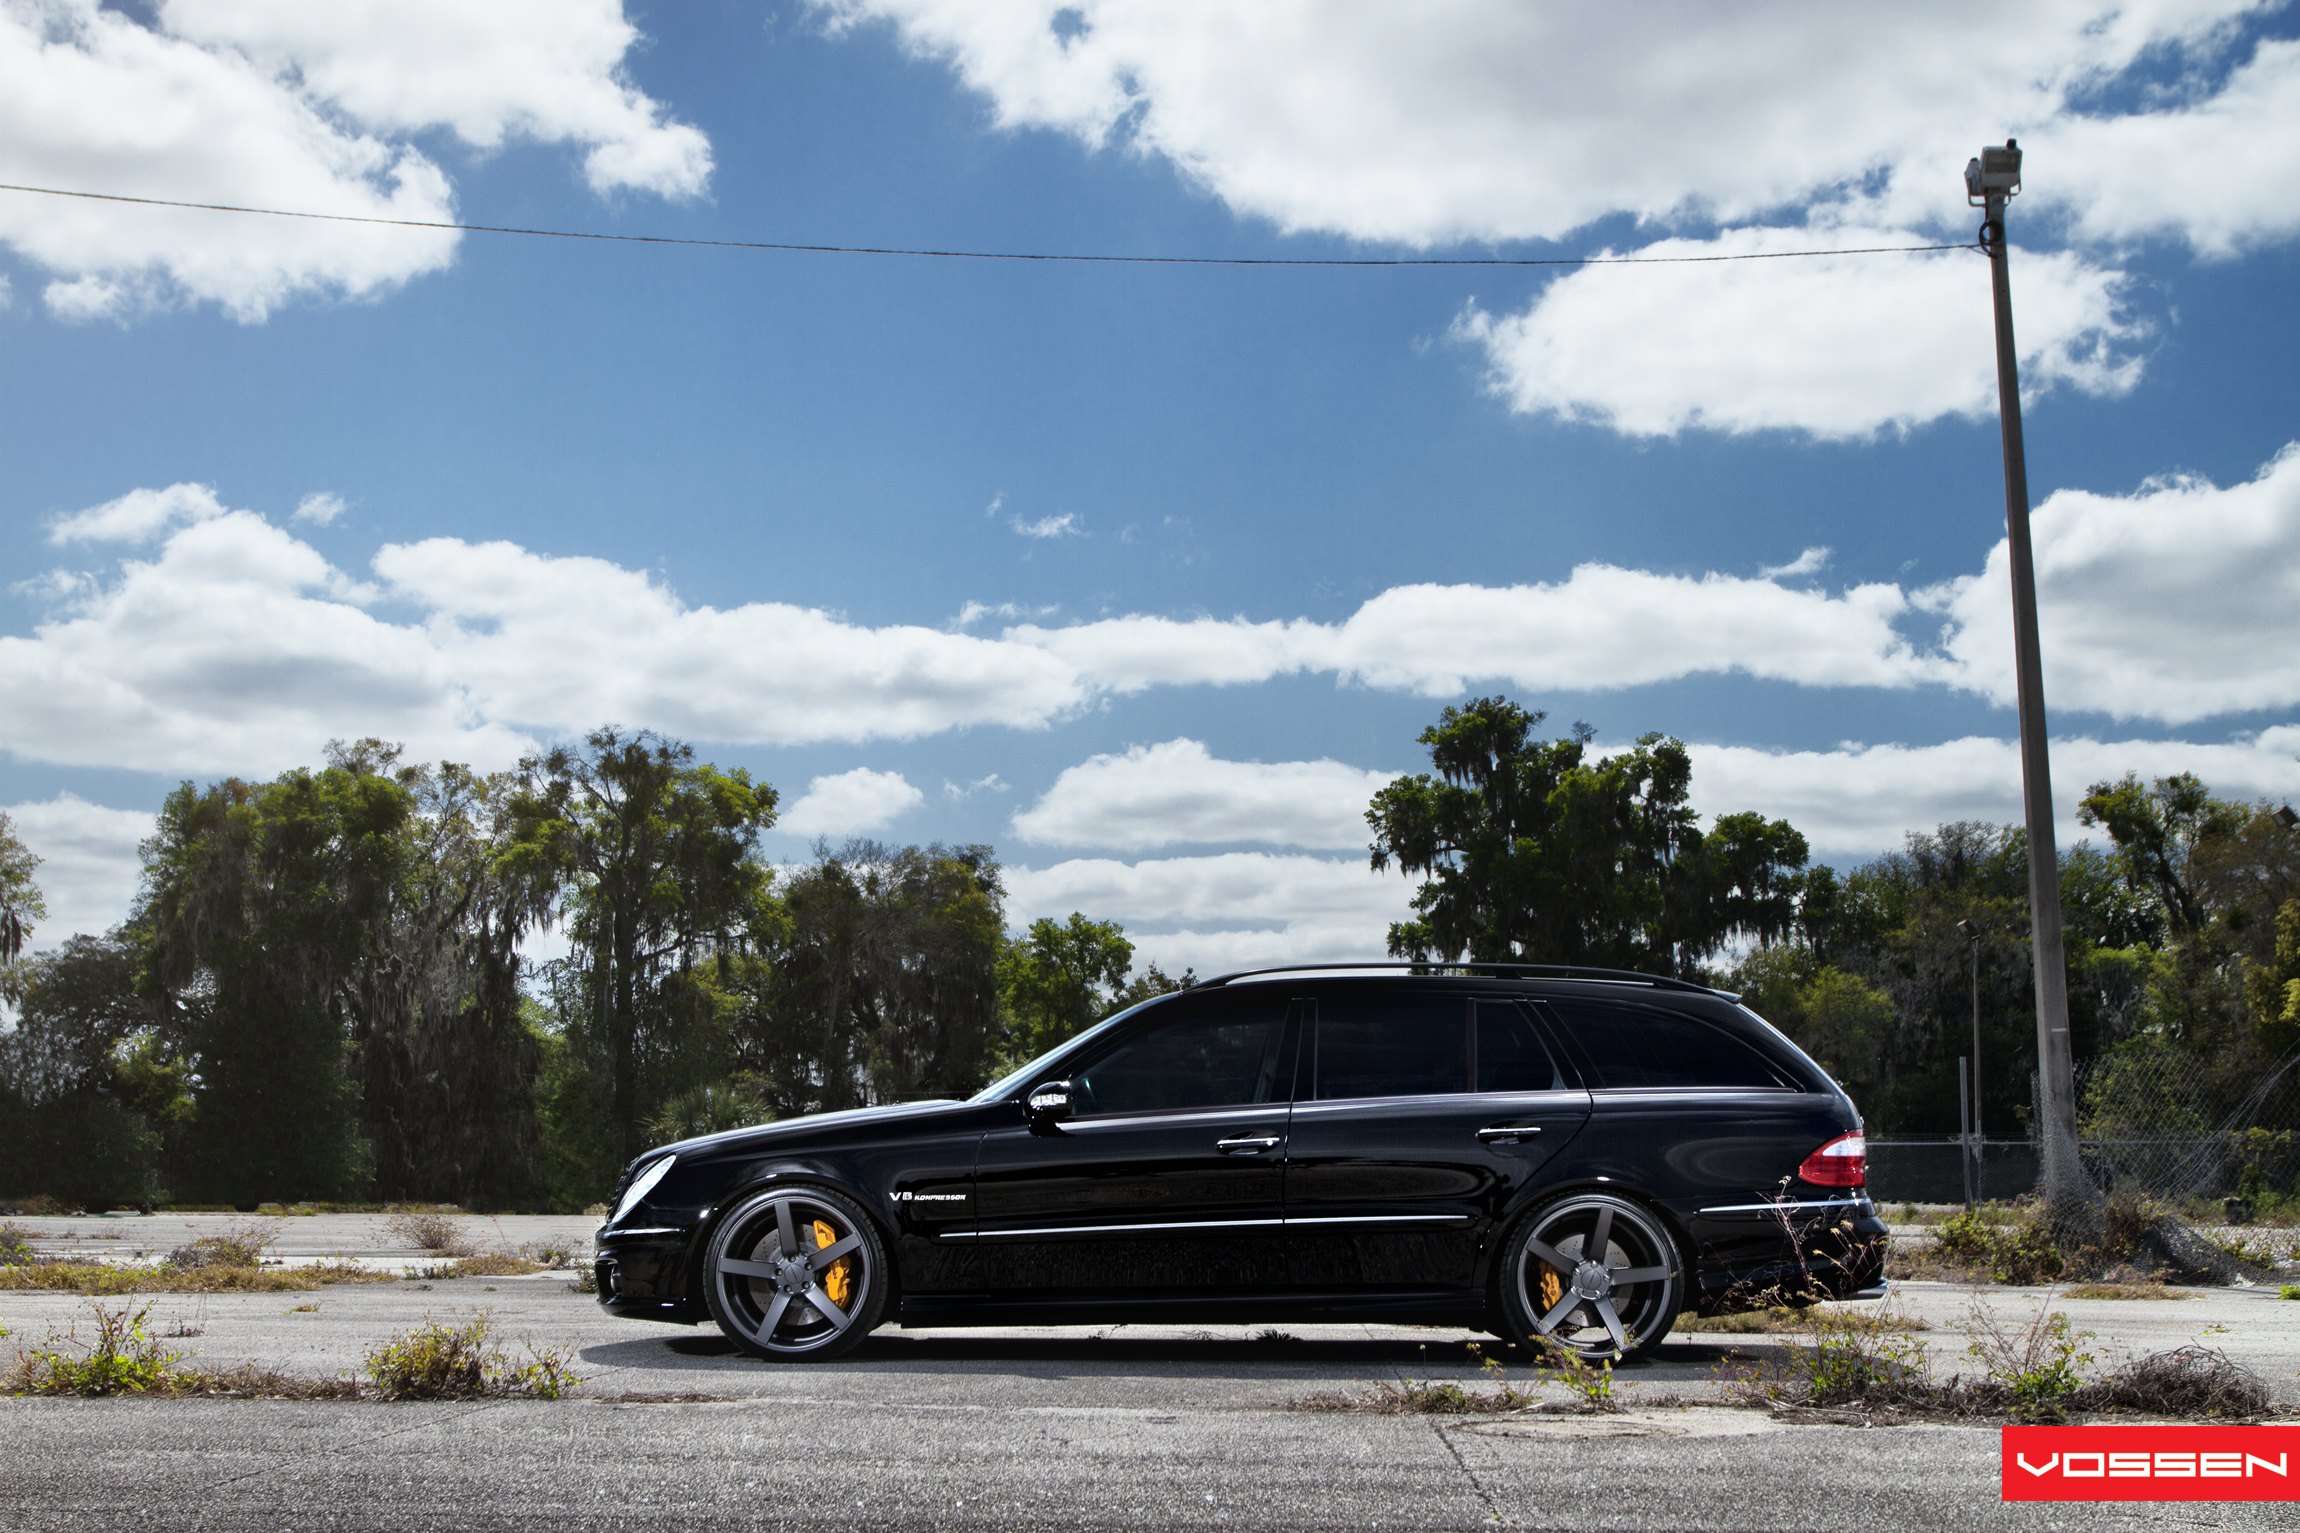 Vossen Rims with Yellow Brakes on Black Mercedes E Class - Photo by Vossen